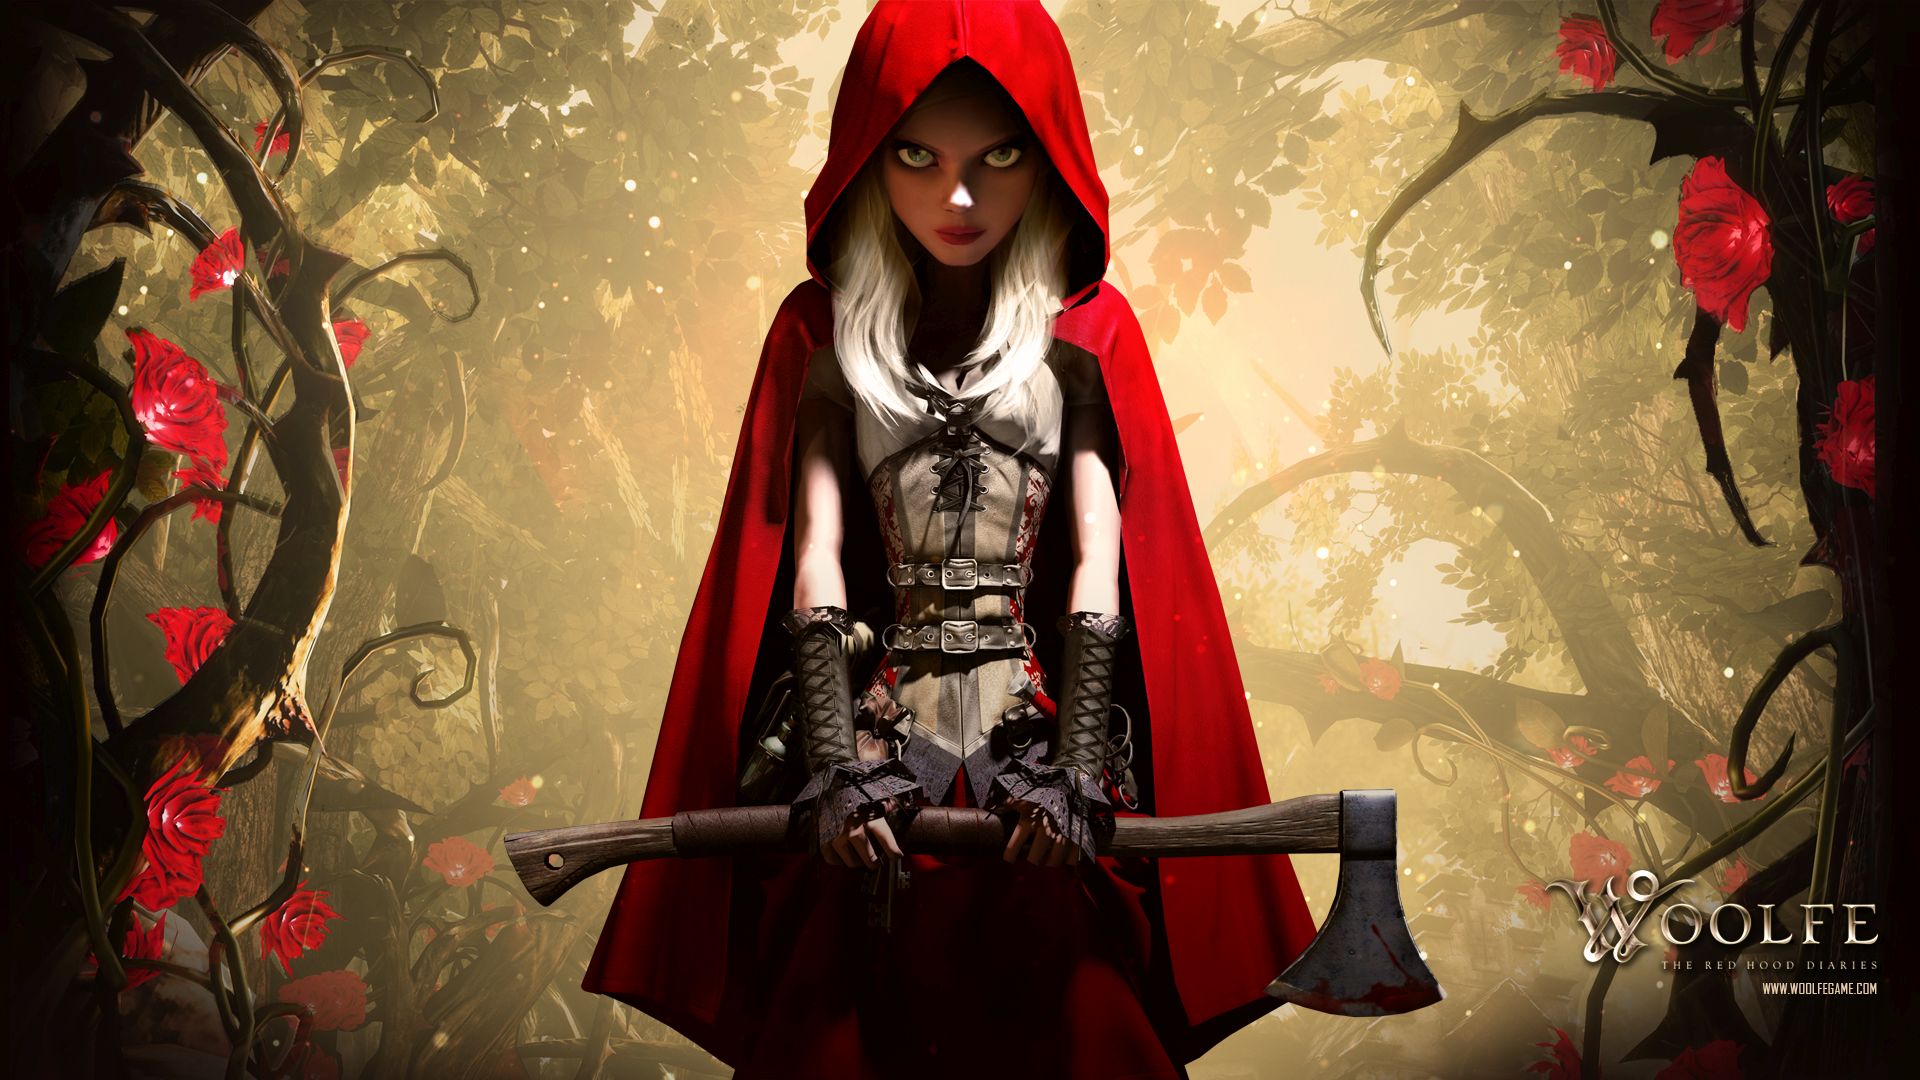 Video Game Woolfe: The Red Hood Diaries HD Wallpaper | Background Image